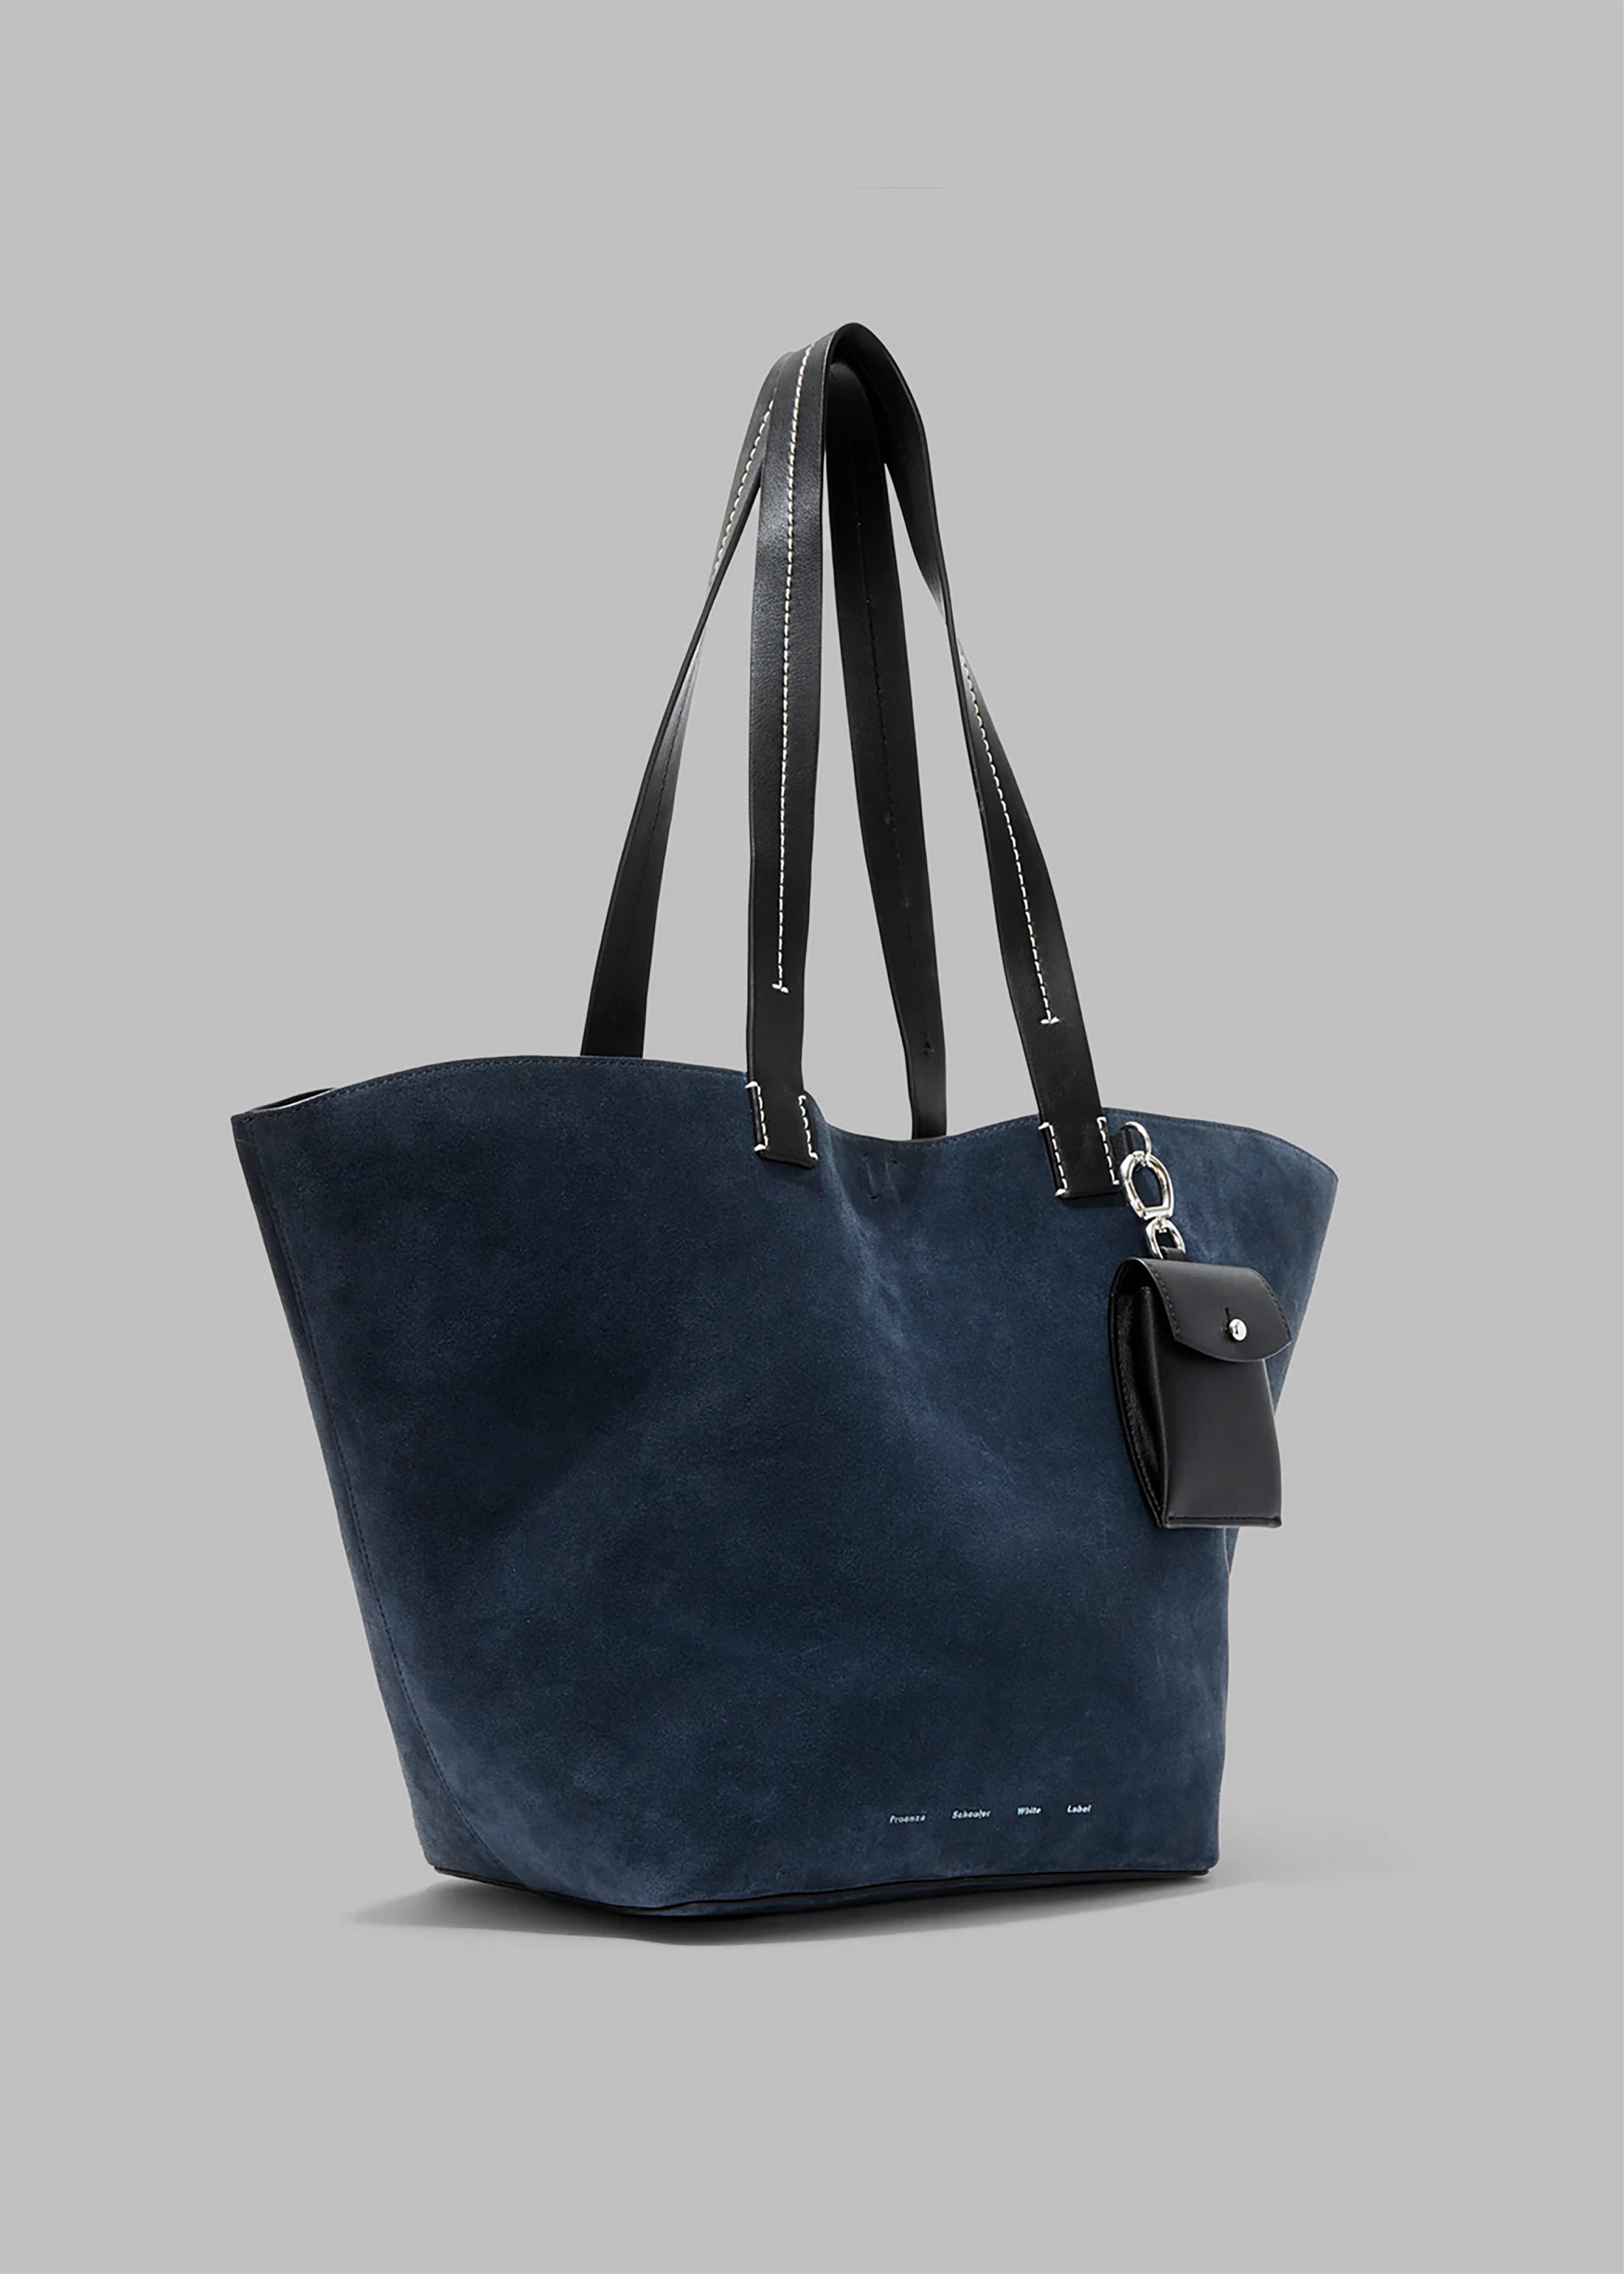 Proenza Schouler White Label Large Suede Bedford Tote - Navy/Black - 4